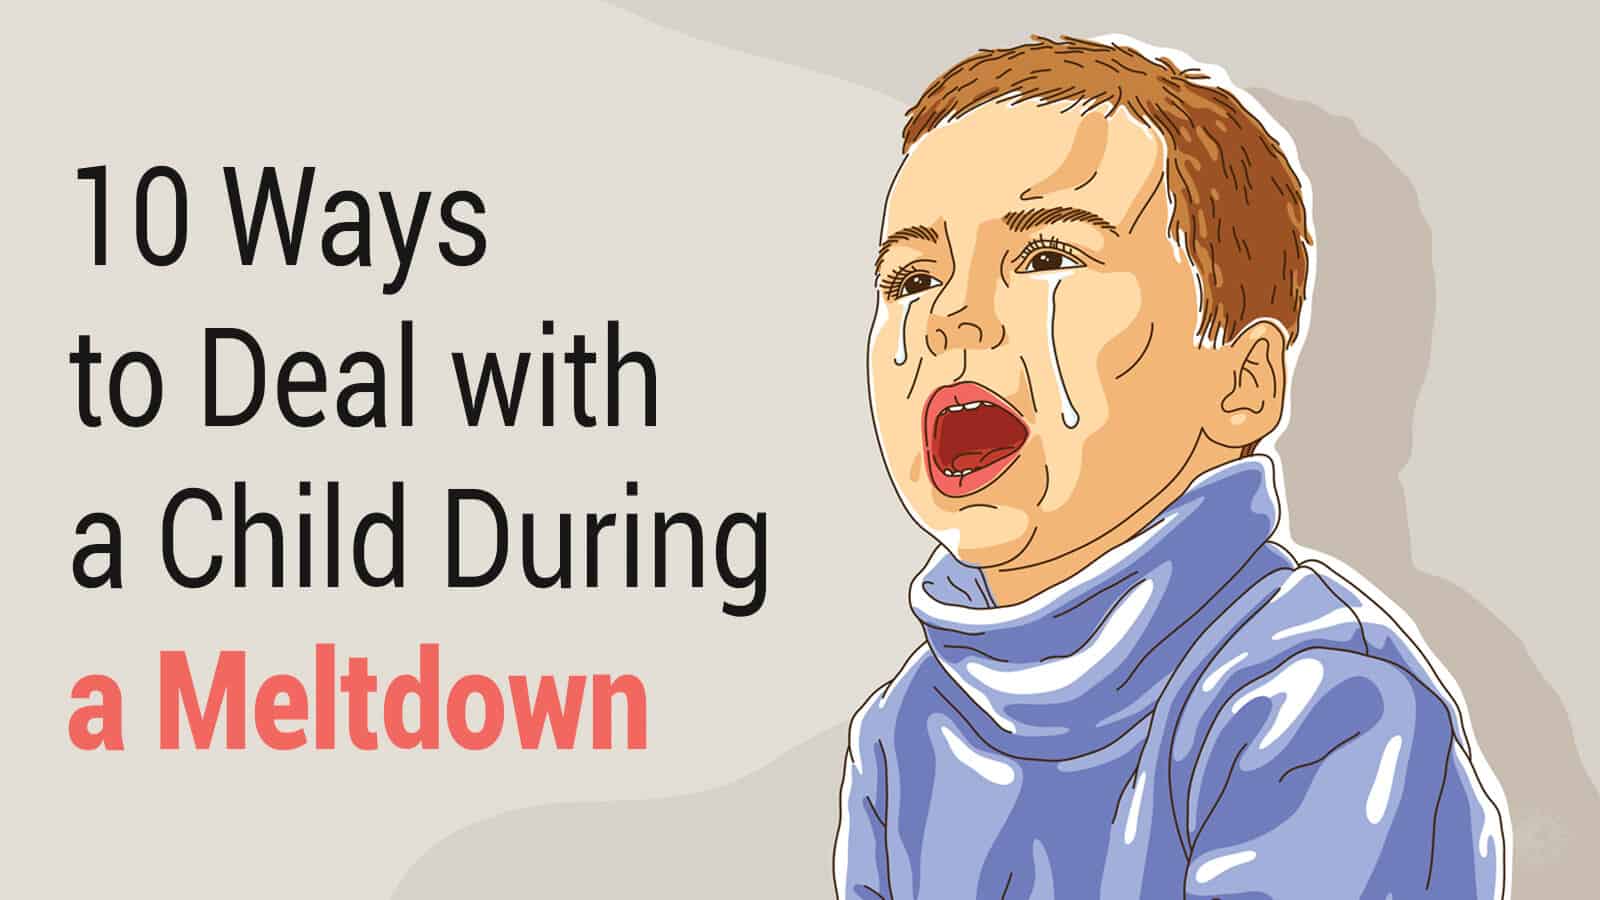 10 Ways to Deal with a Child During a Meltdown 6 Minute Read